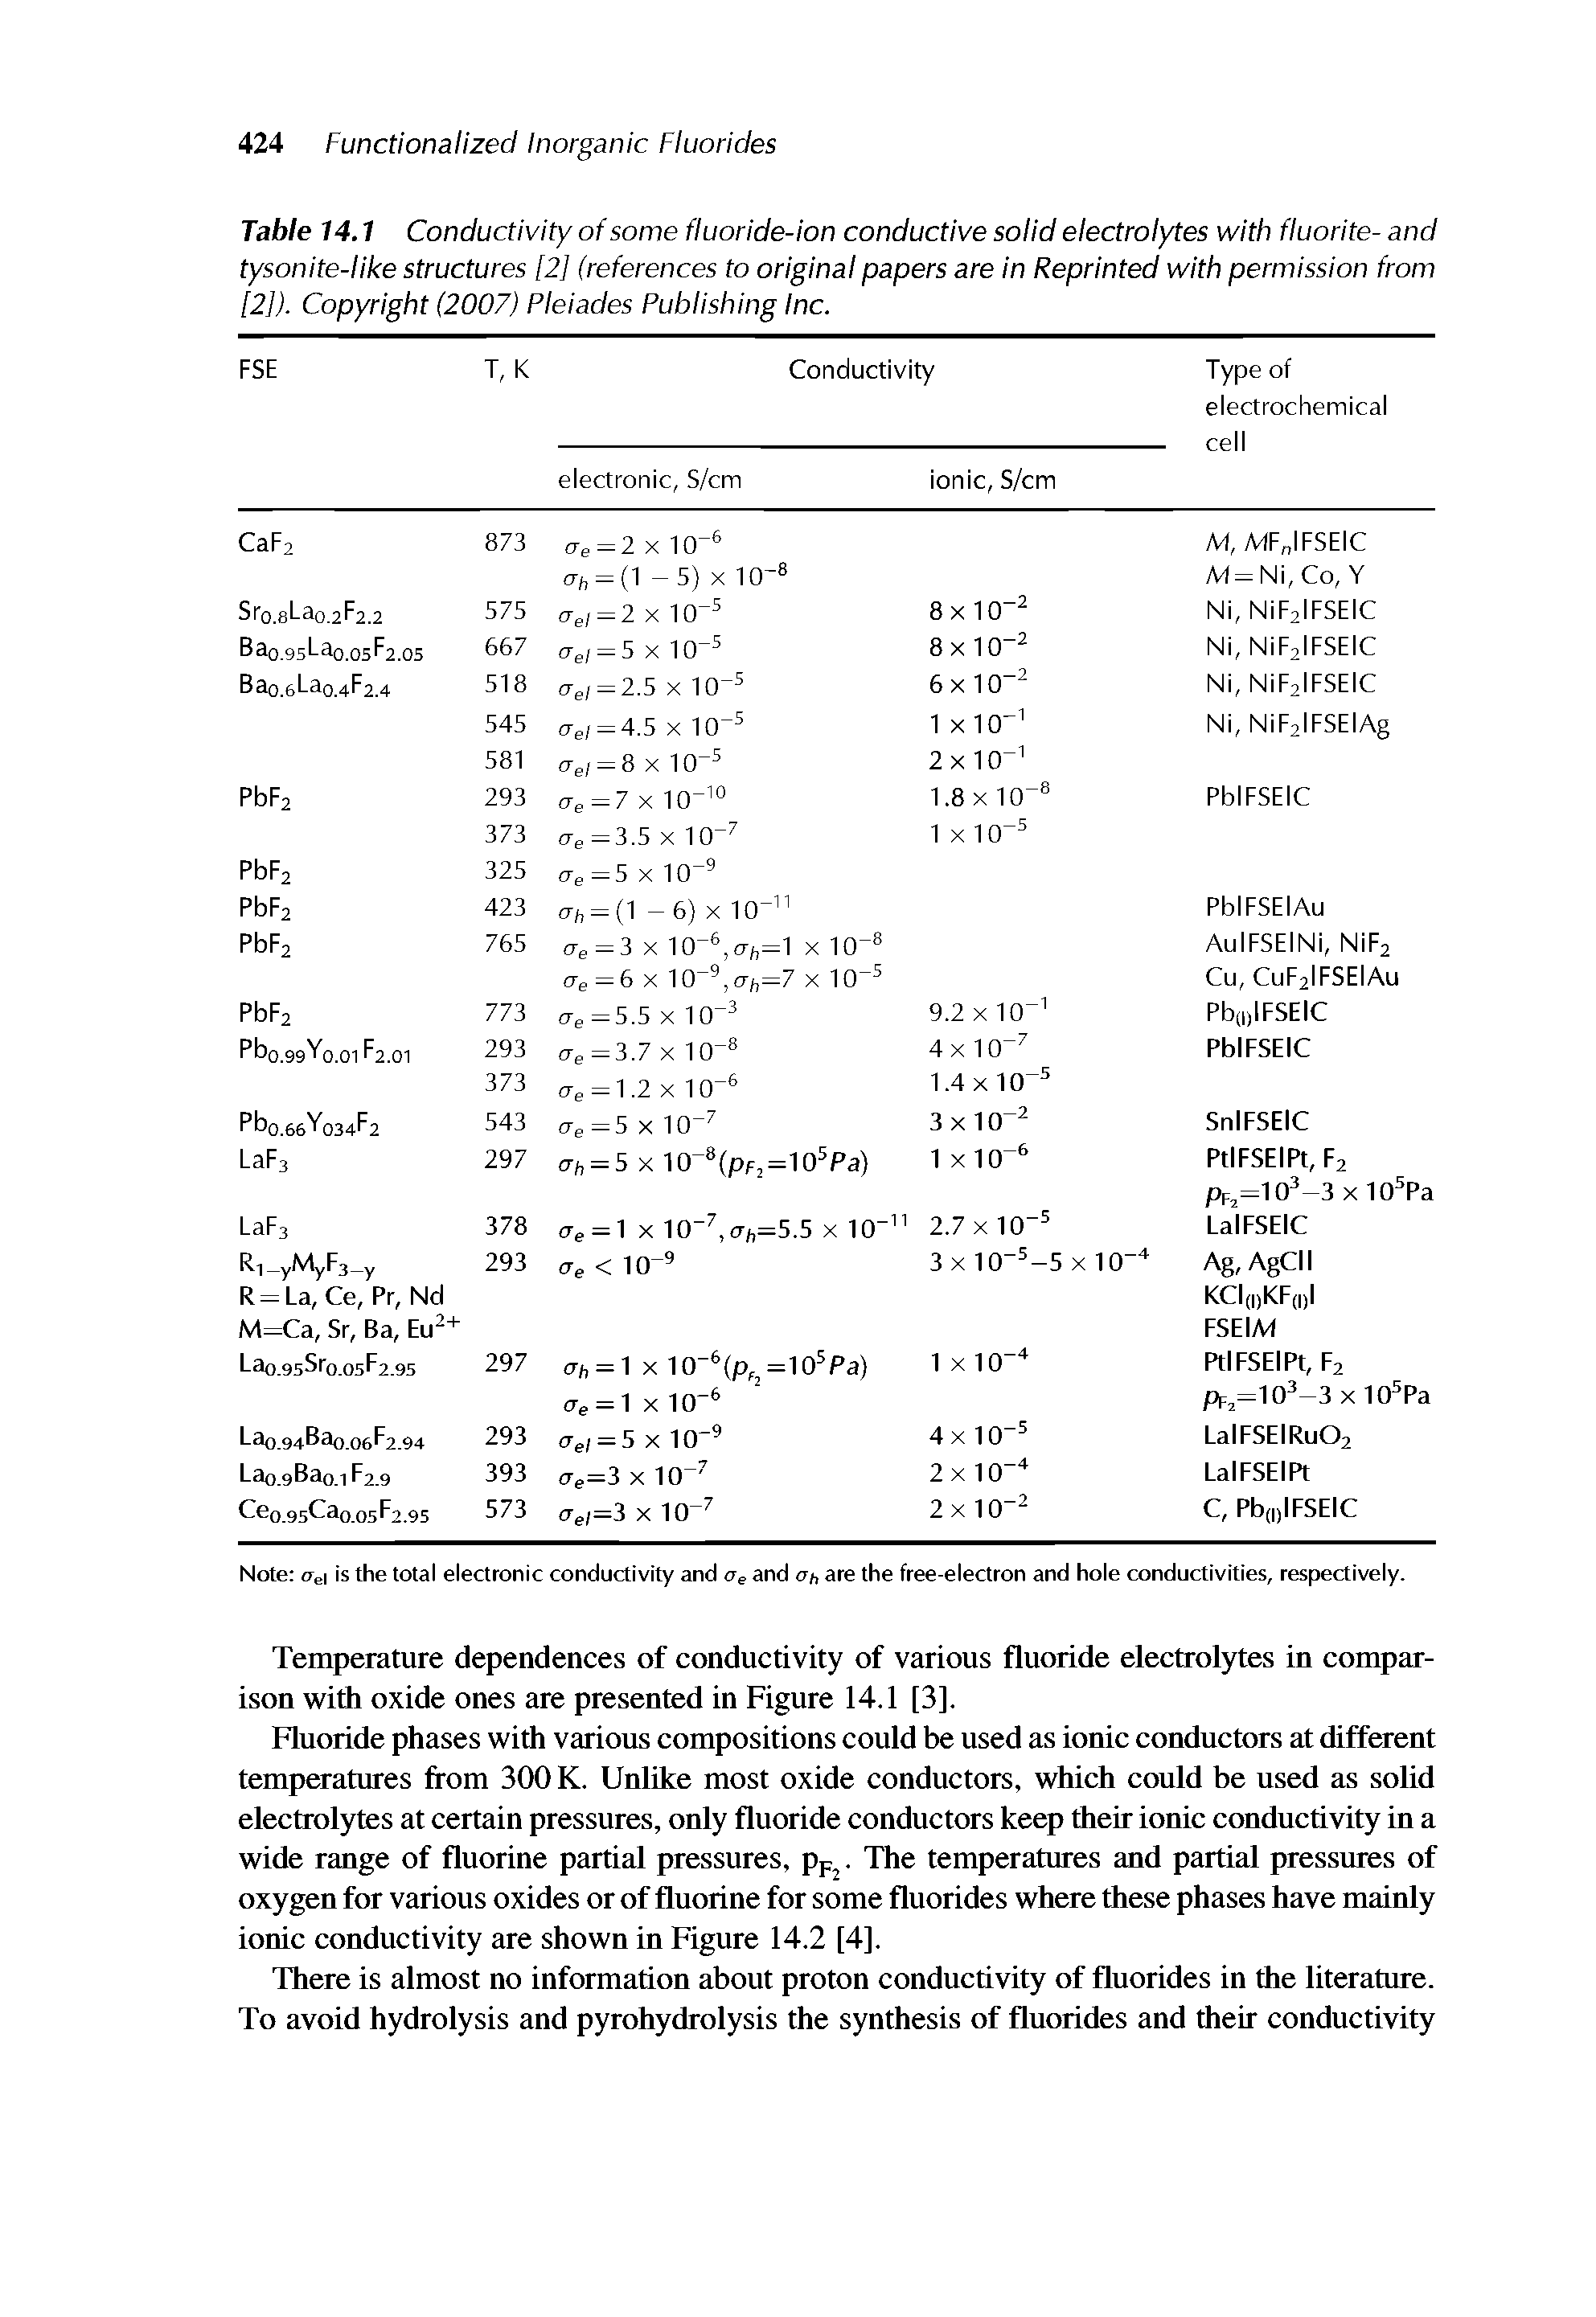 Table 14.1 Conductivity of some fluoride-ion conductive solid electrolytes with fluorite- and tysonite-like structures [2] (references to original papers are In Reprinted with permission from [2]). Copyright (2007) Pleiades Publishing Inc.